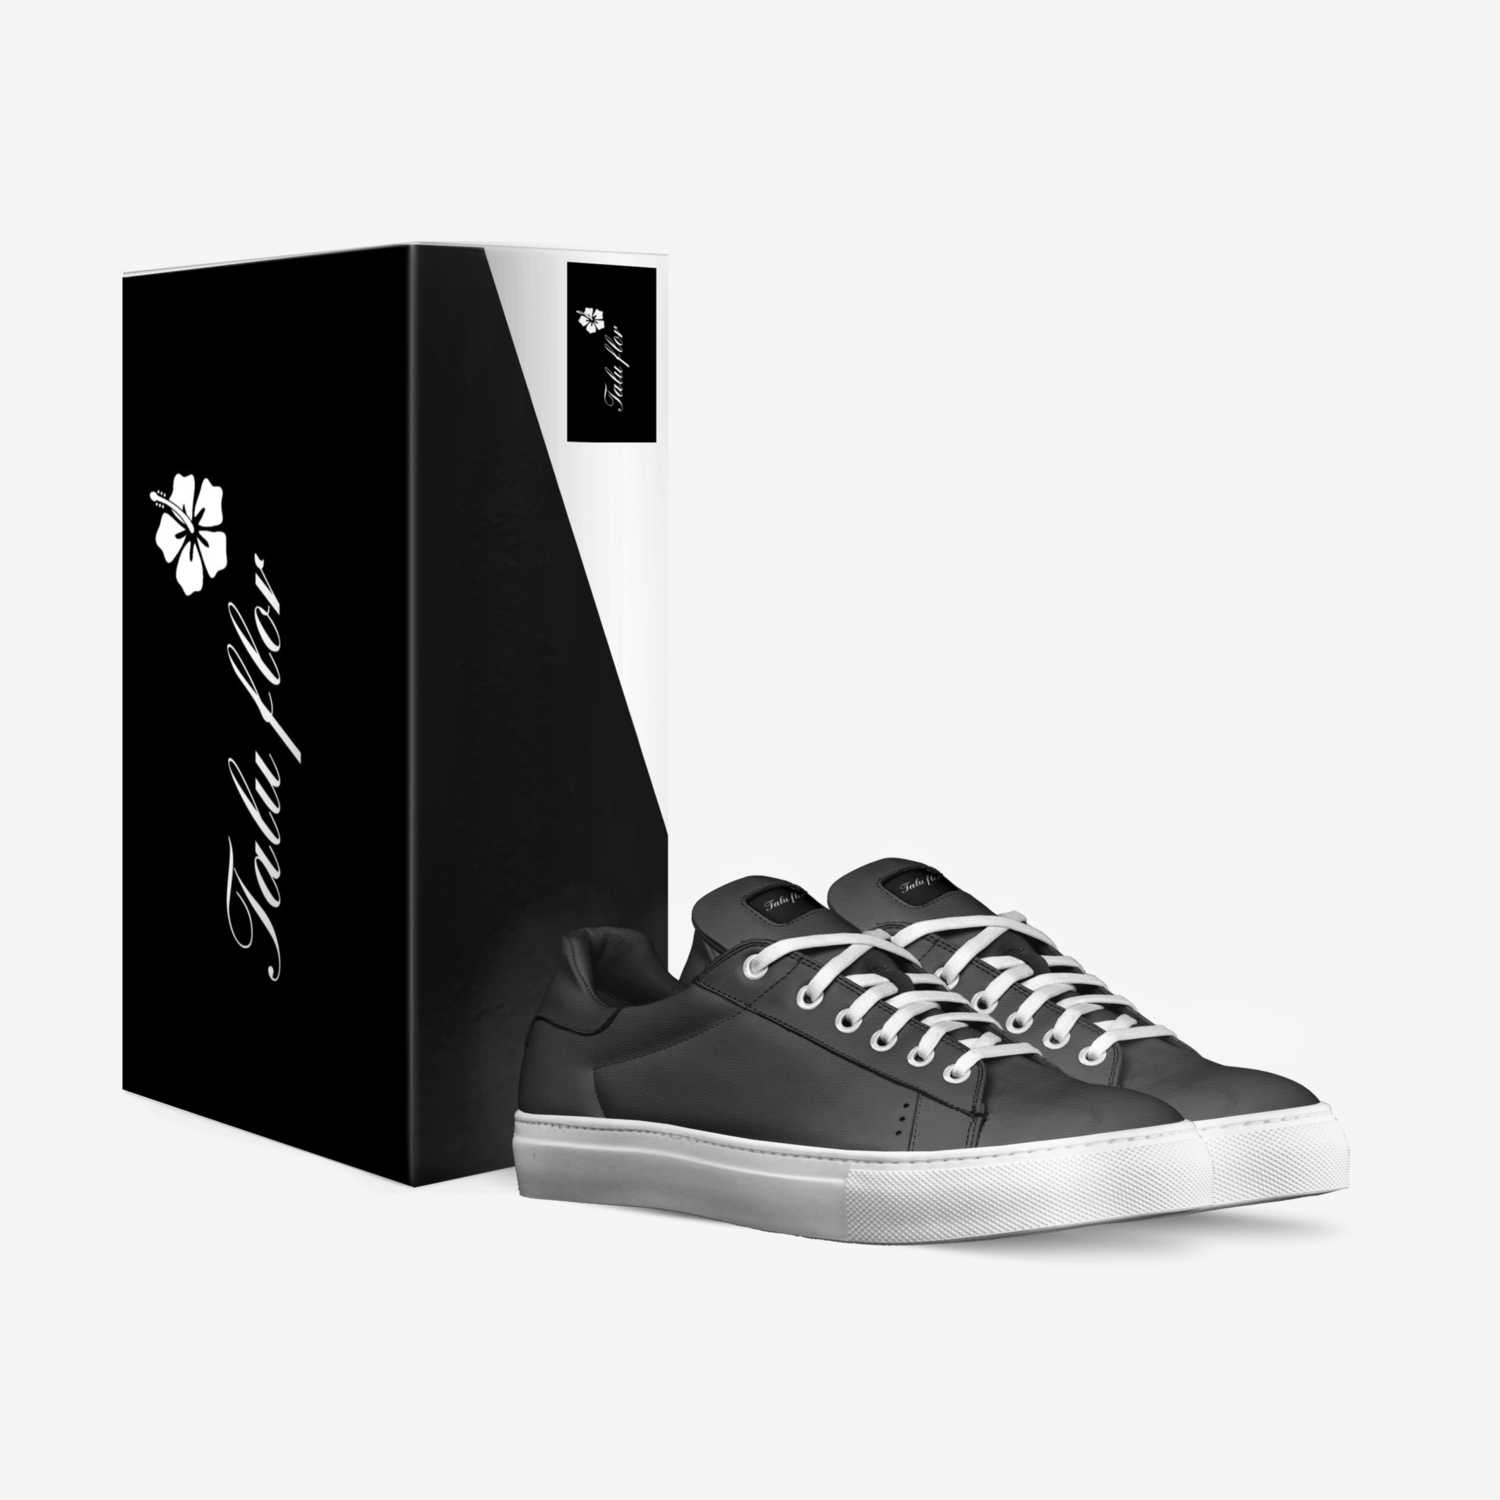 Talu Flor custom made in Italy shoes by Fight Inc. | Box view